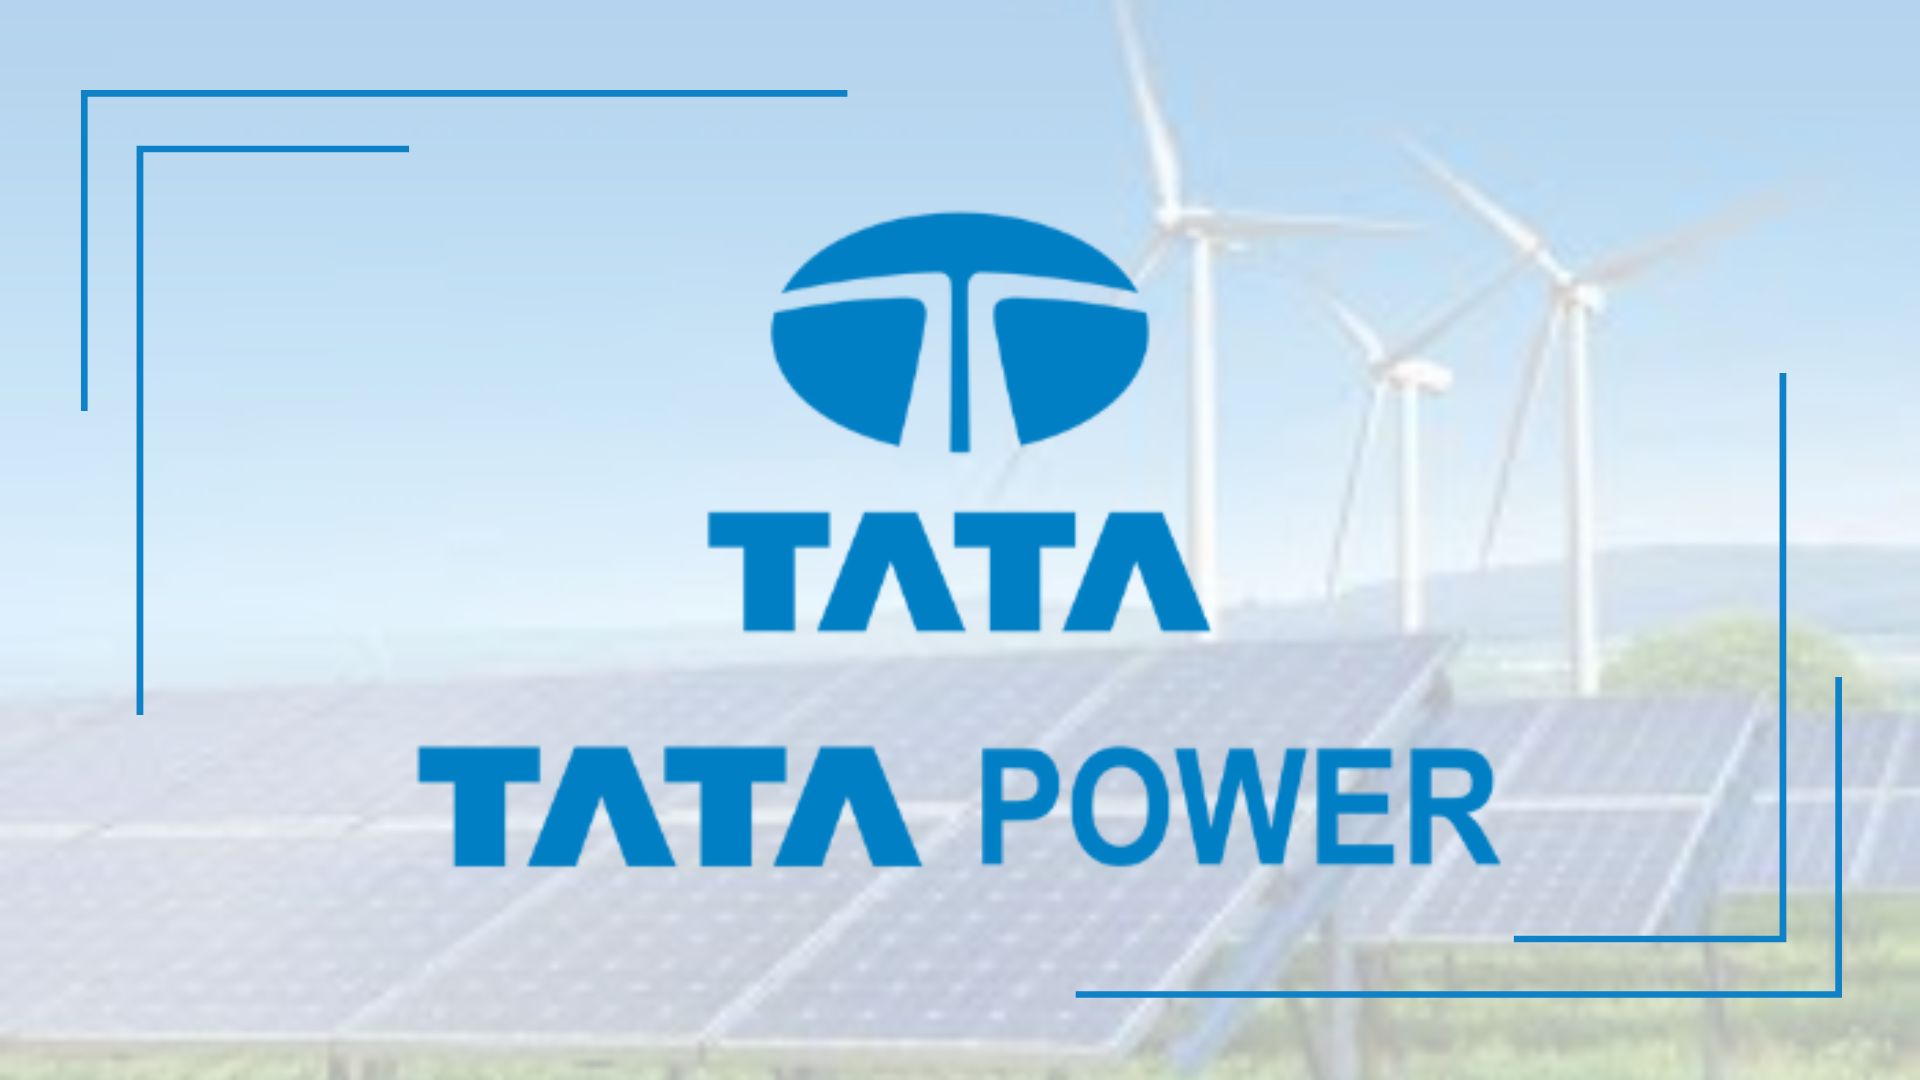 Tata Power - List of Companies Owned by Tata Group